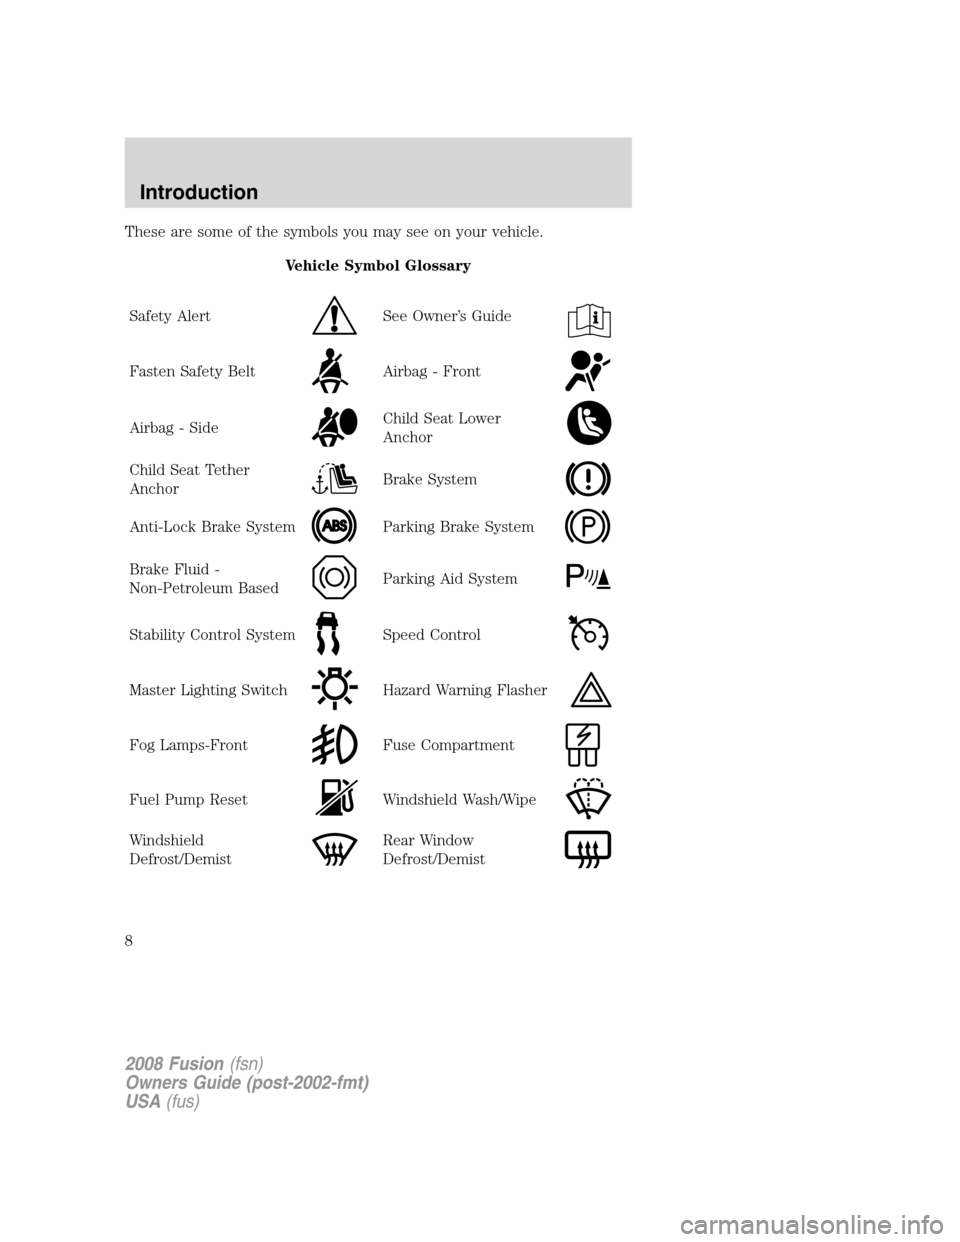 FORD FUSION (AMERICAS) 2008 1.G Owners Manual These are some of the symbols you may see on your vehicle.
Vehicle Symbol Glossary
Safety Alert
See Owner’s Guide
Fasten Safety BeltAirbag - Front
Airbag - SideChild Seat Lower
Anchor
Child Seat Tet